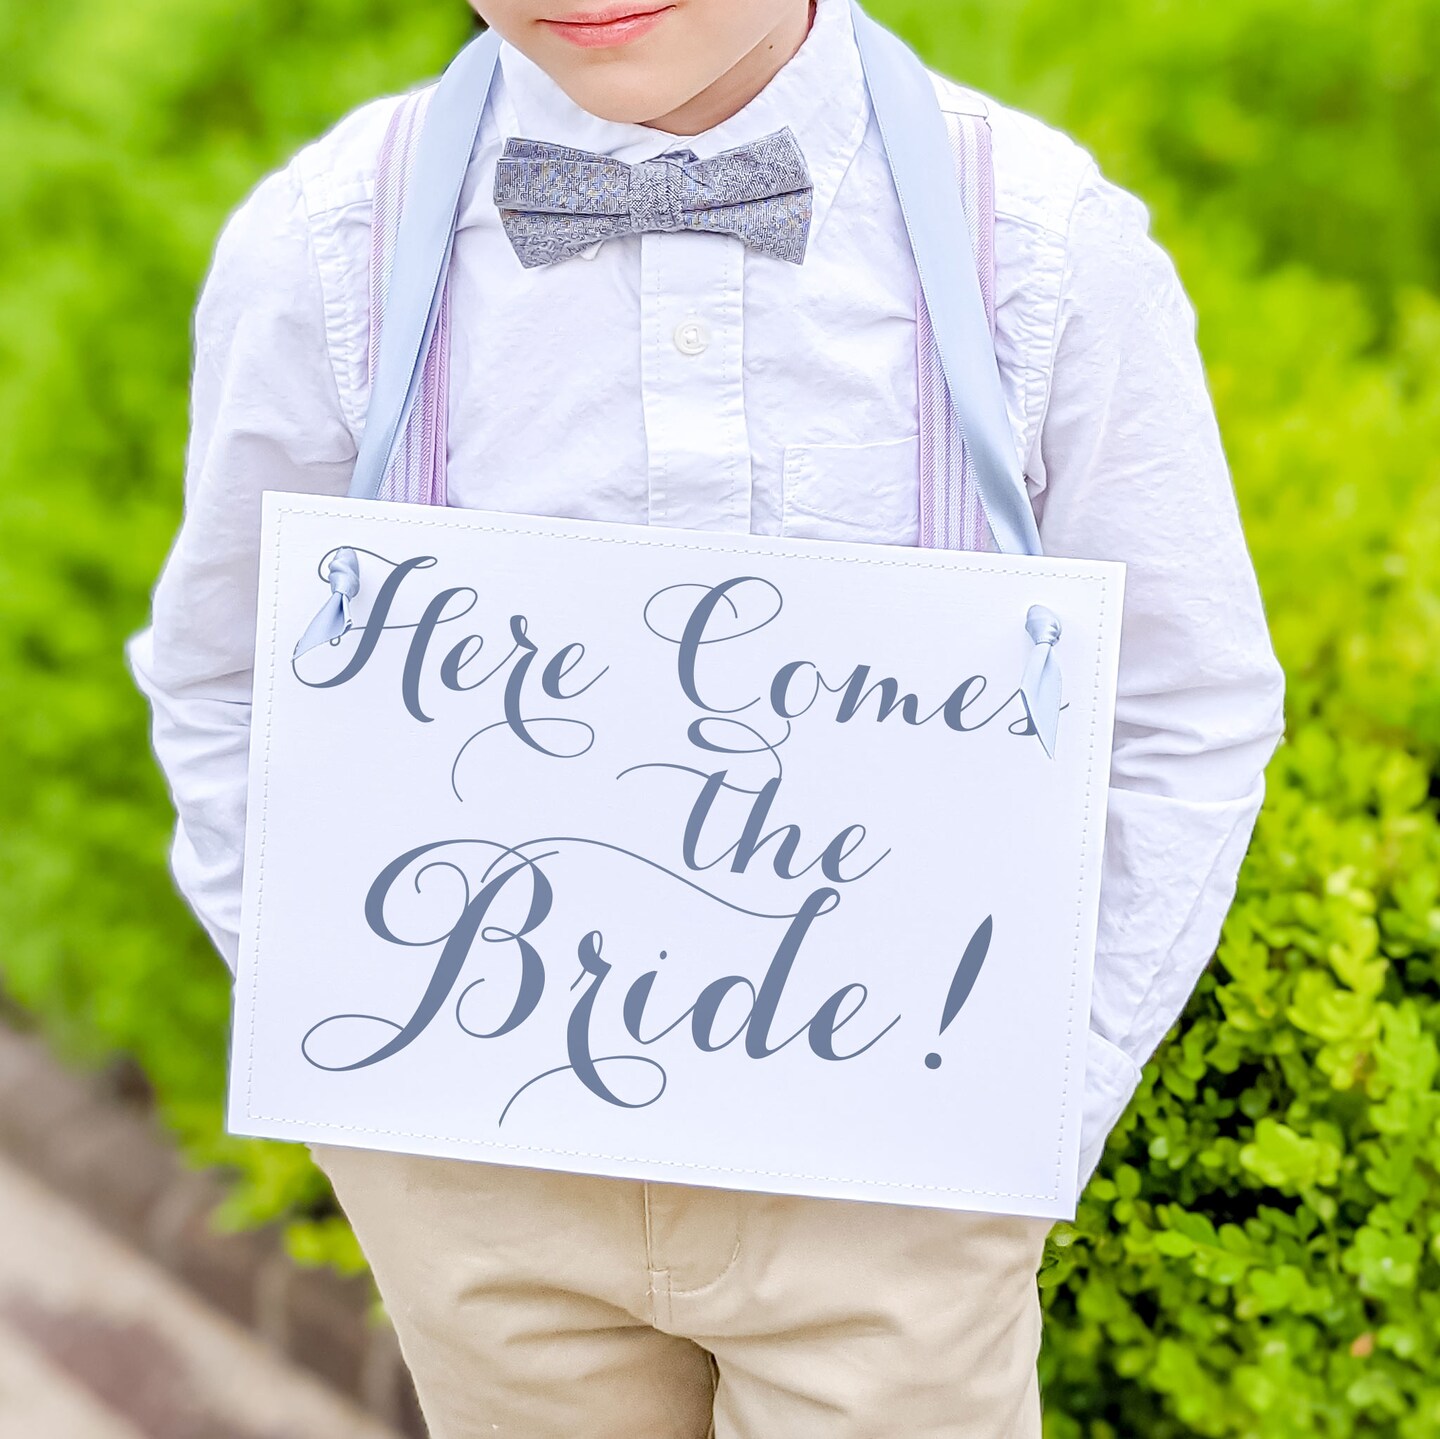 Ritzy Rose 2 Cute Ring Bearer Signs - Slate on 11x8in White Linen Cardstock with Dusty Blue Ribbon